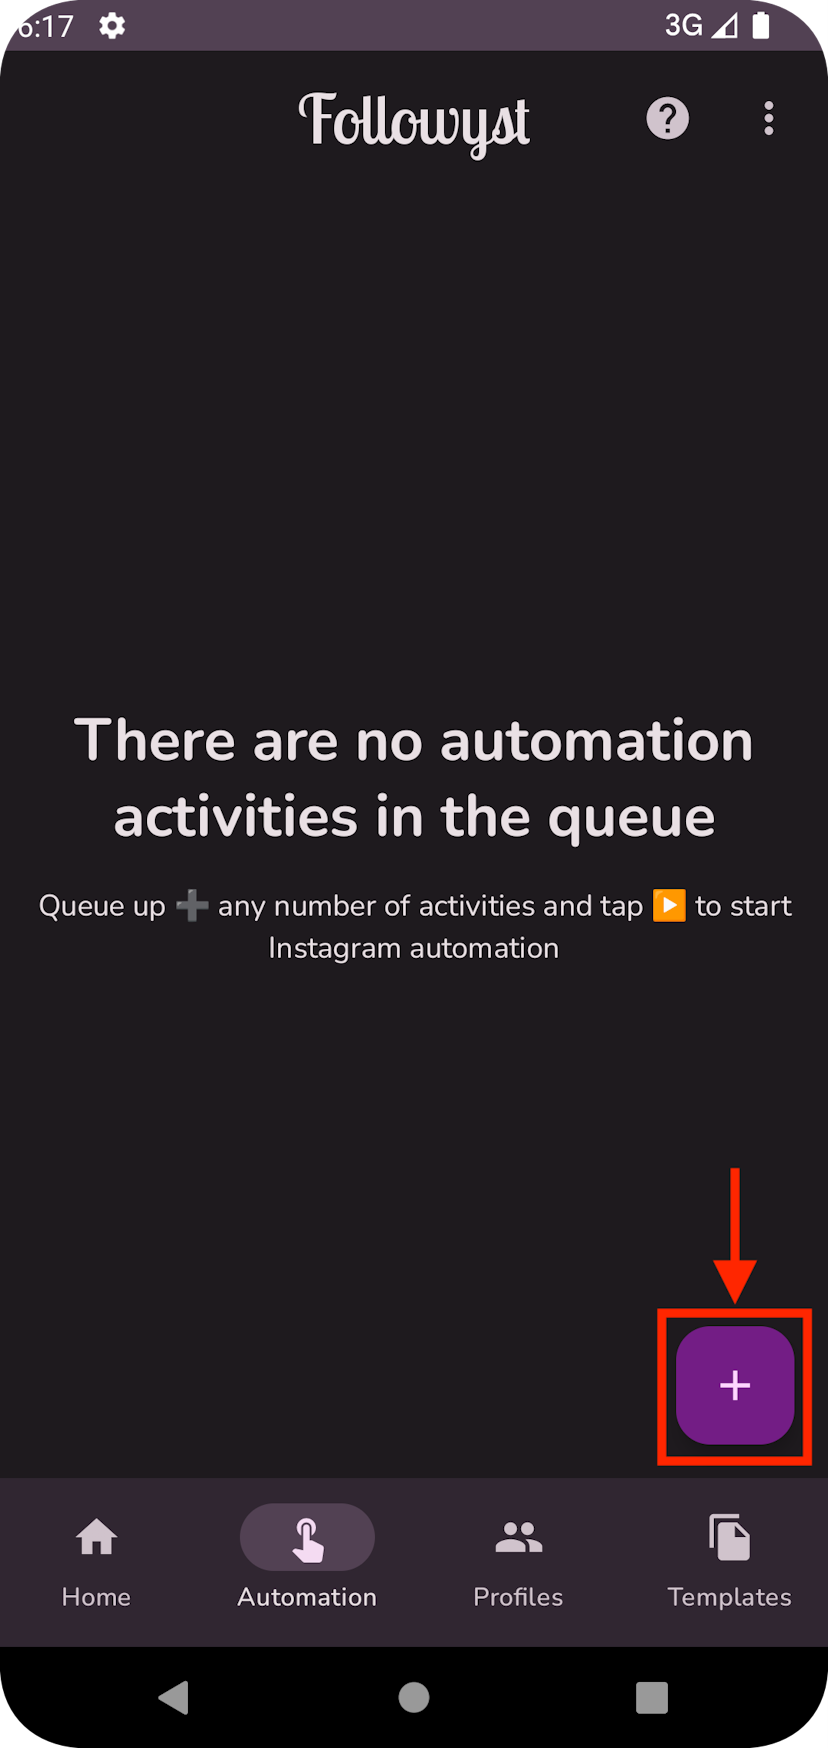 Screenshot of the Followyst's Automation tab with no activities in the queue